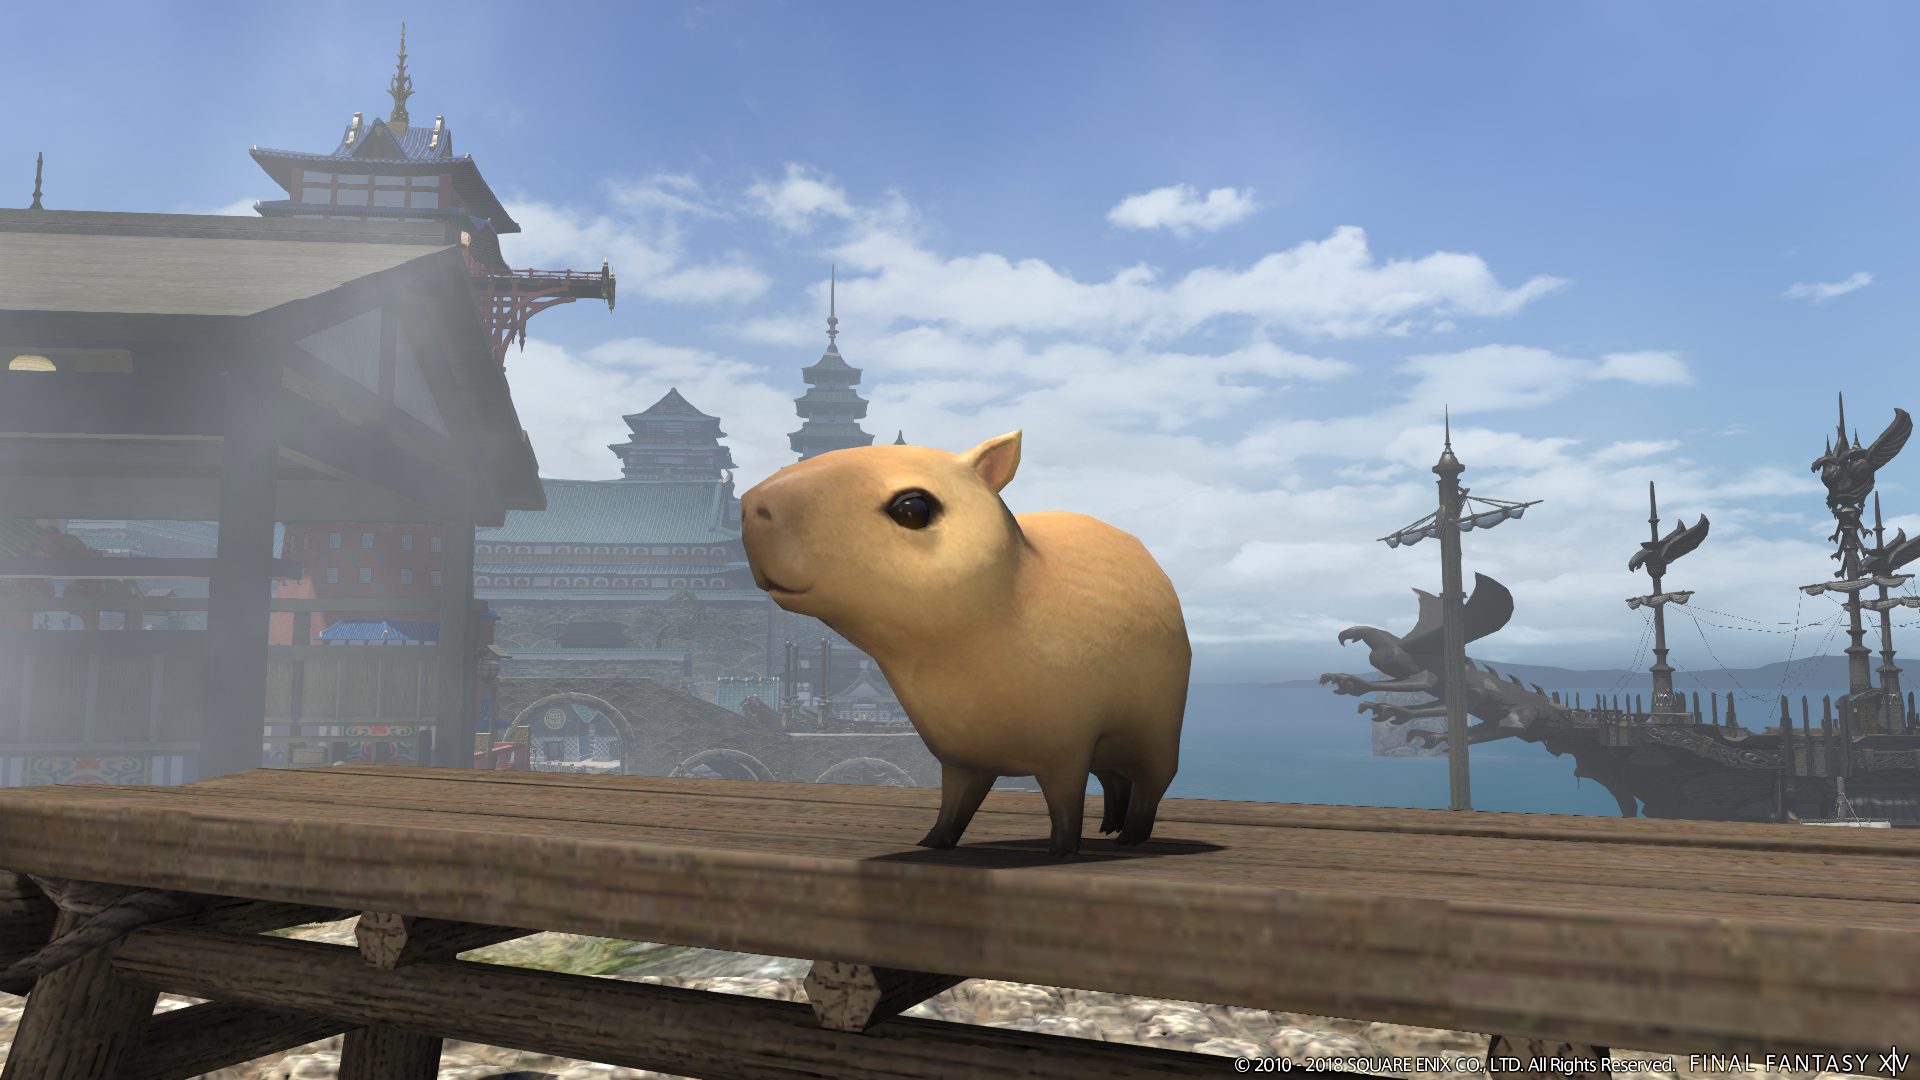 Final Fantasy XIV reveals its patch notes for Prelude in Violet.